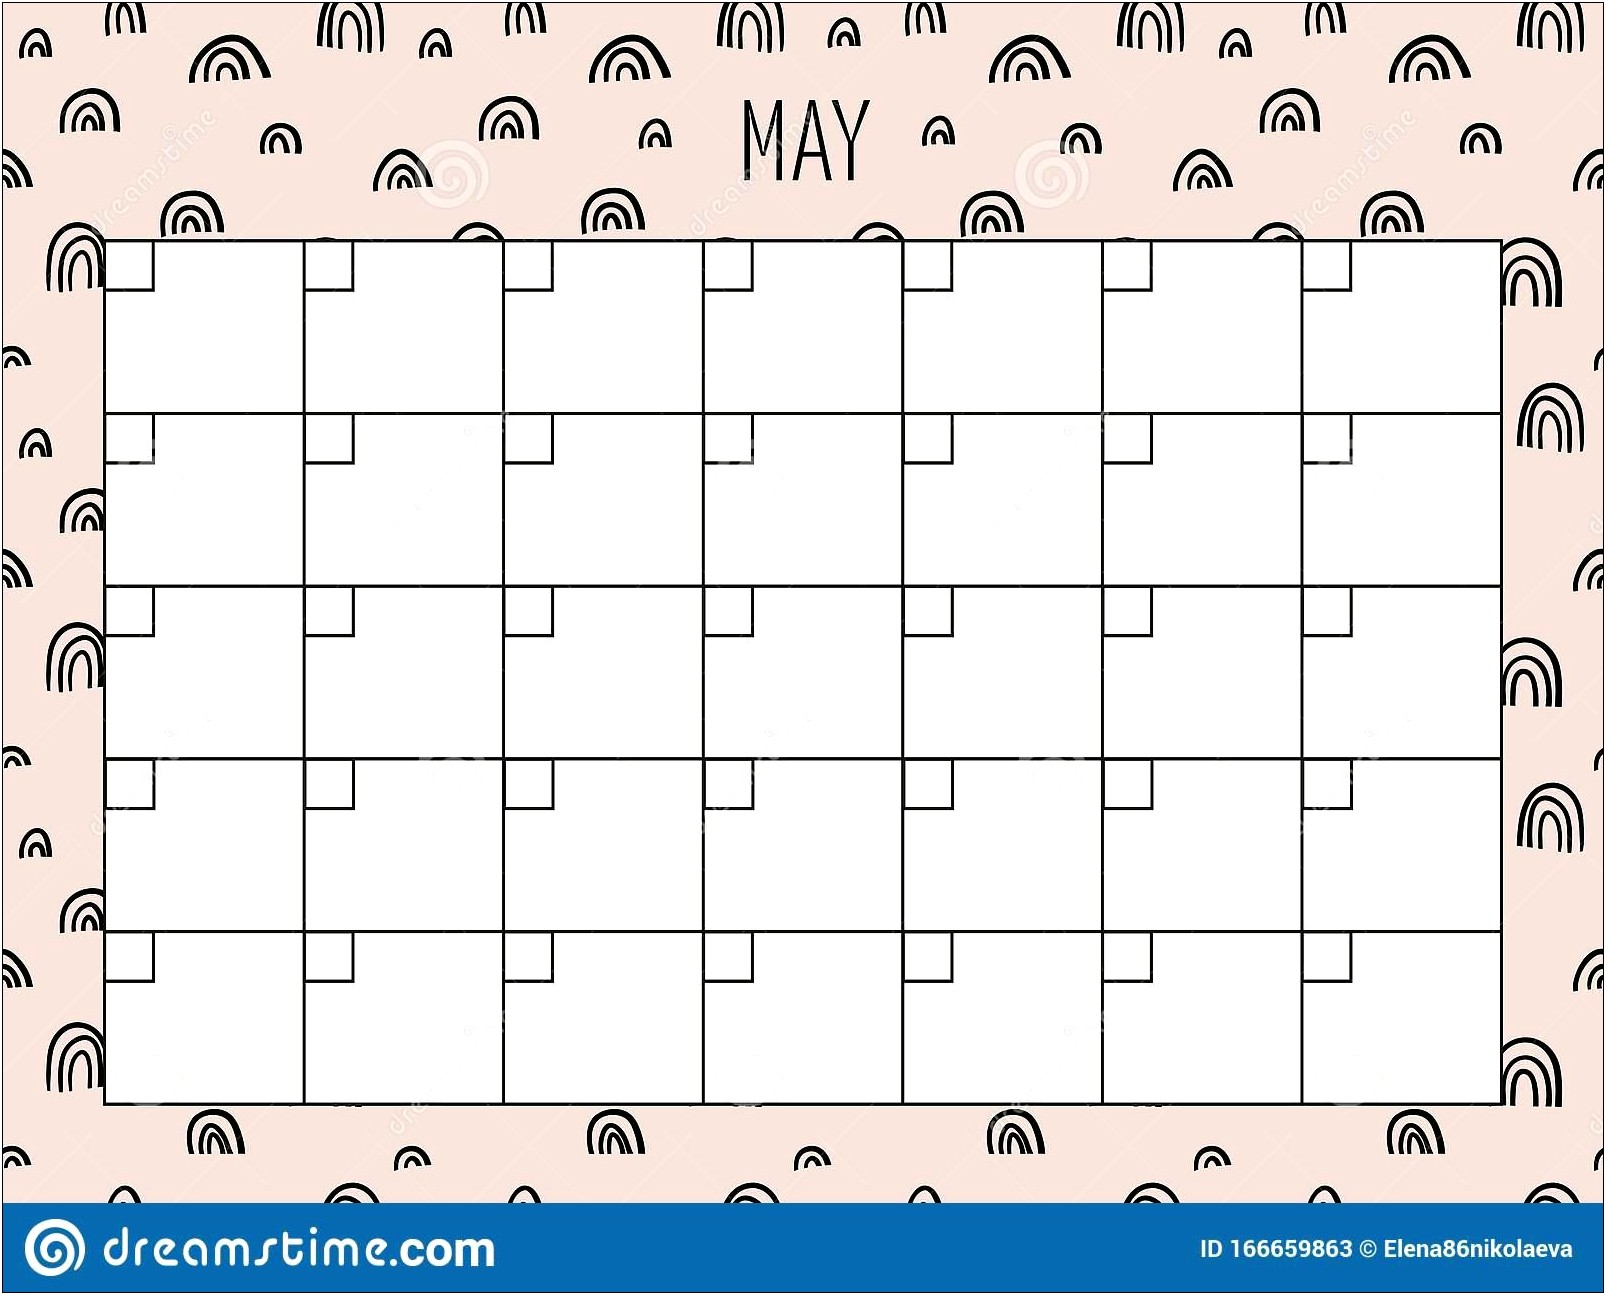 Free Calender Template Date To Date